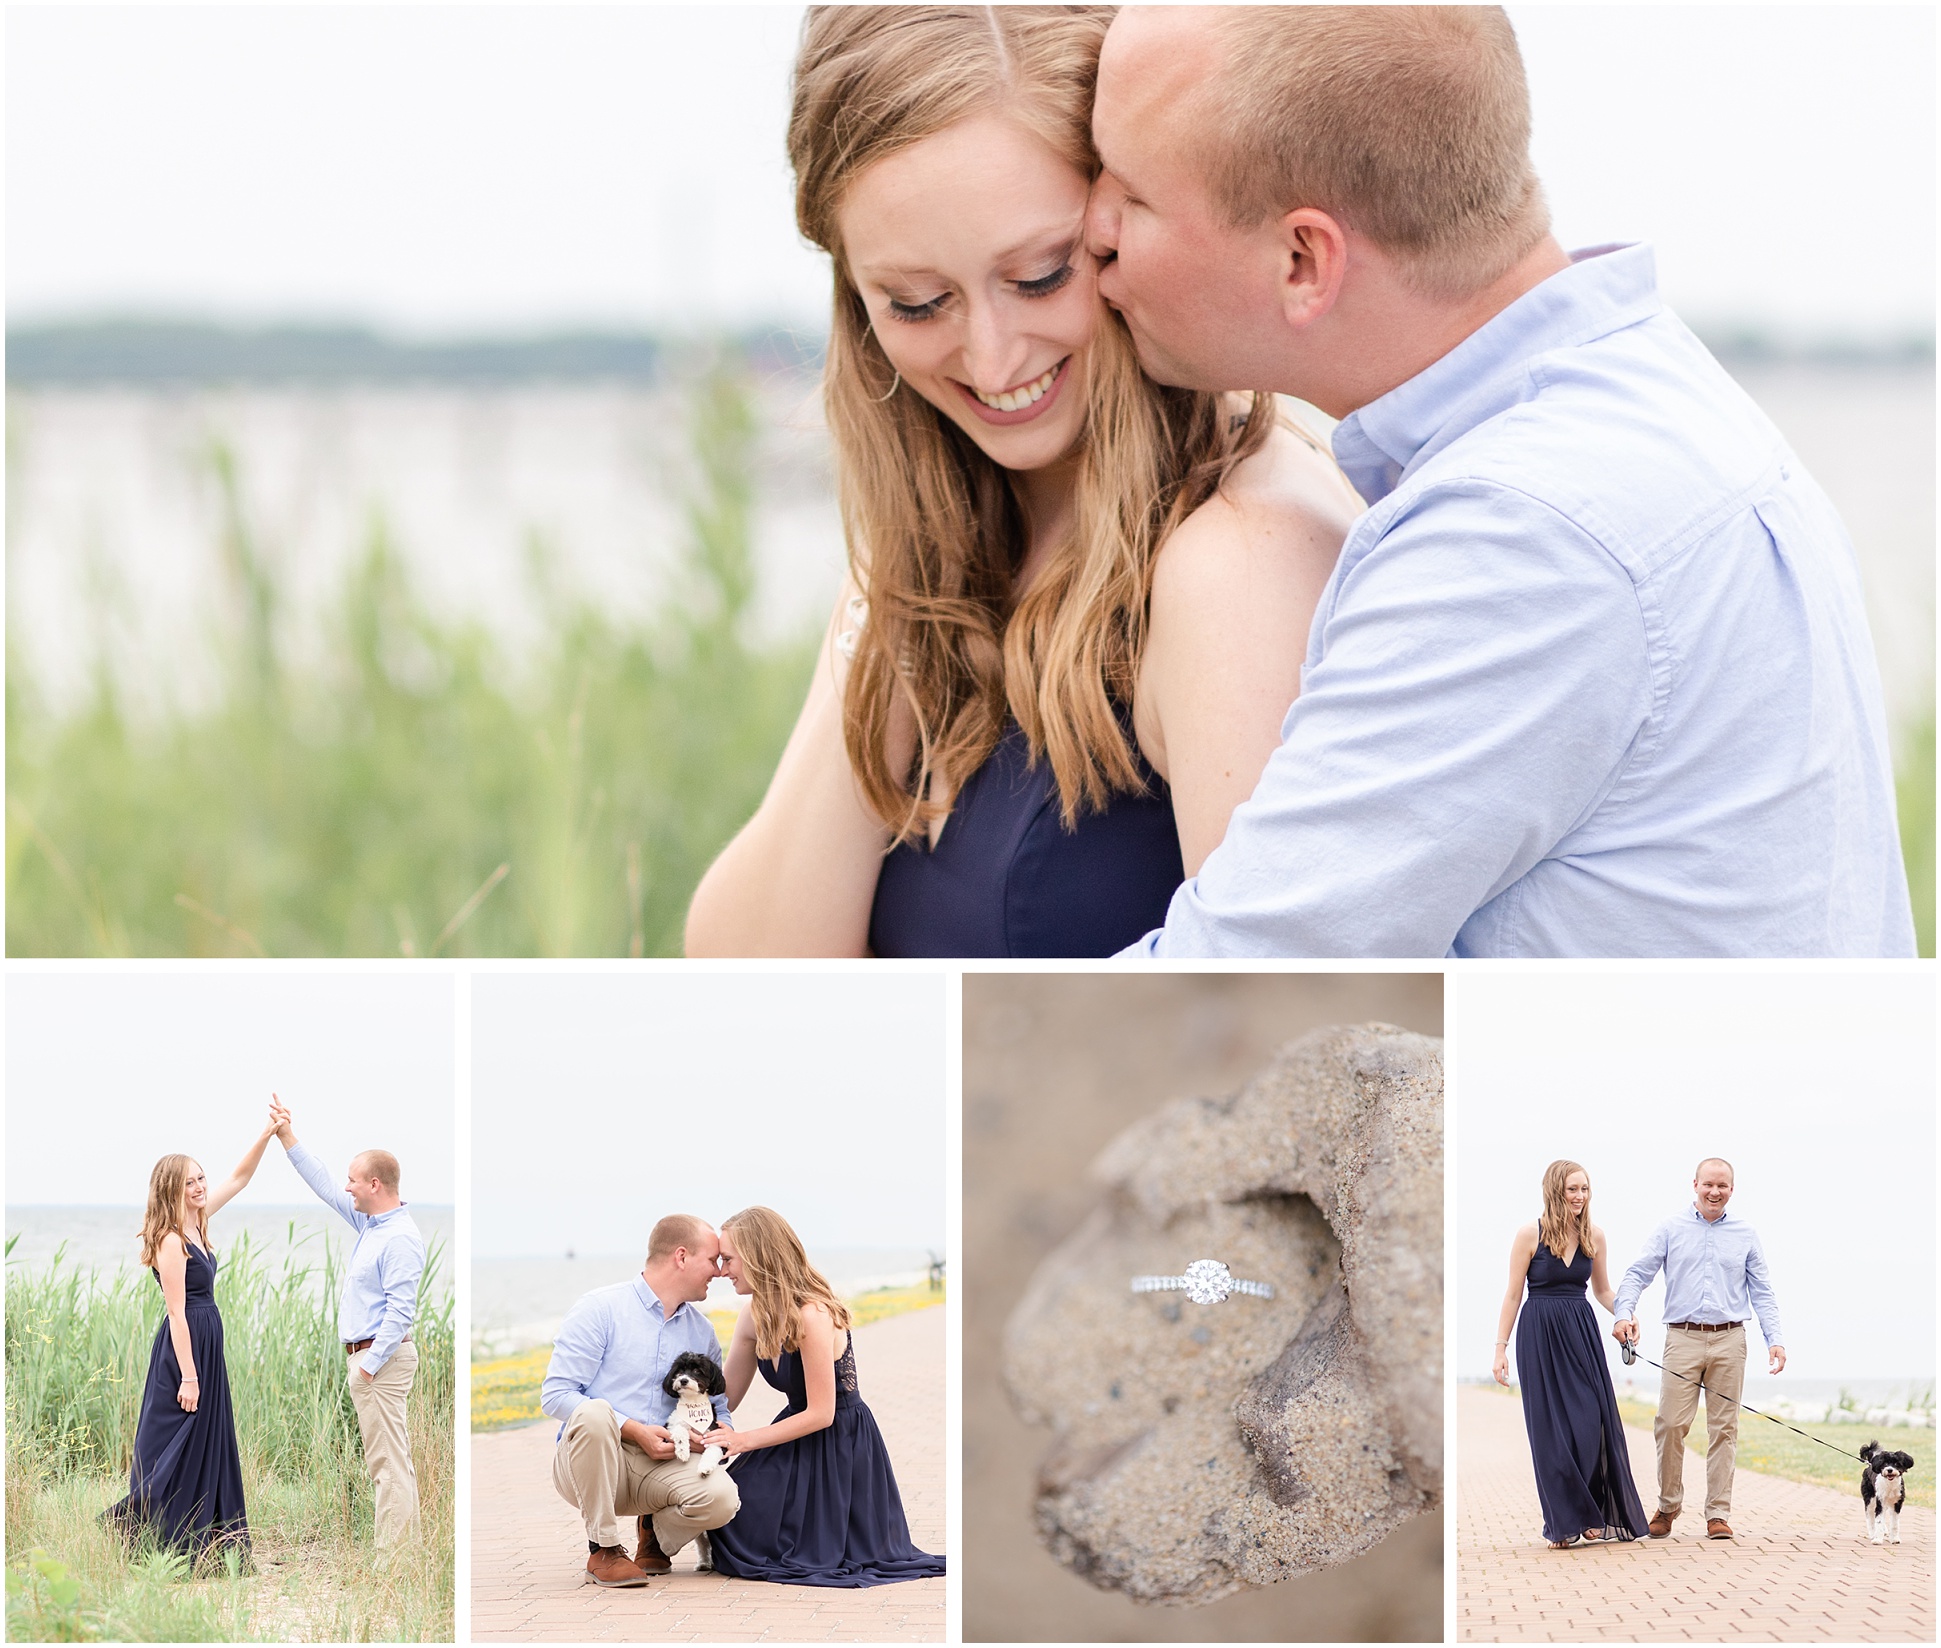 Sara and Will's Featured Image from the Waterfront Engagement Session